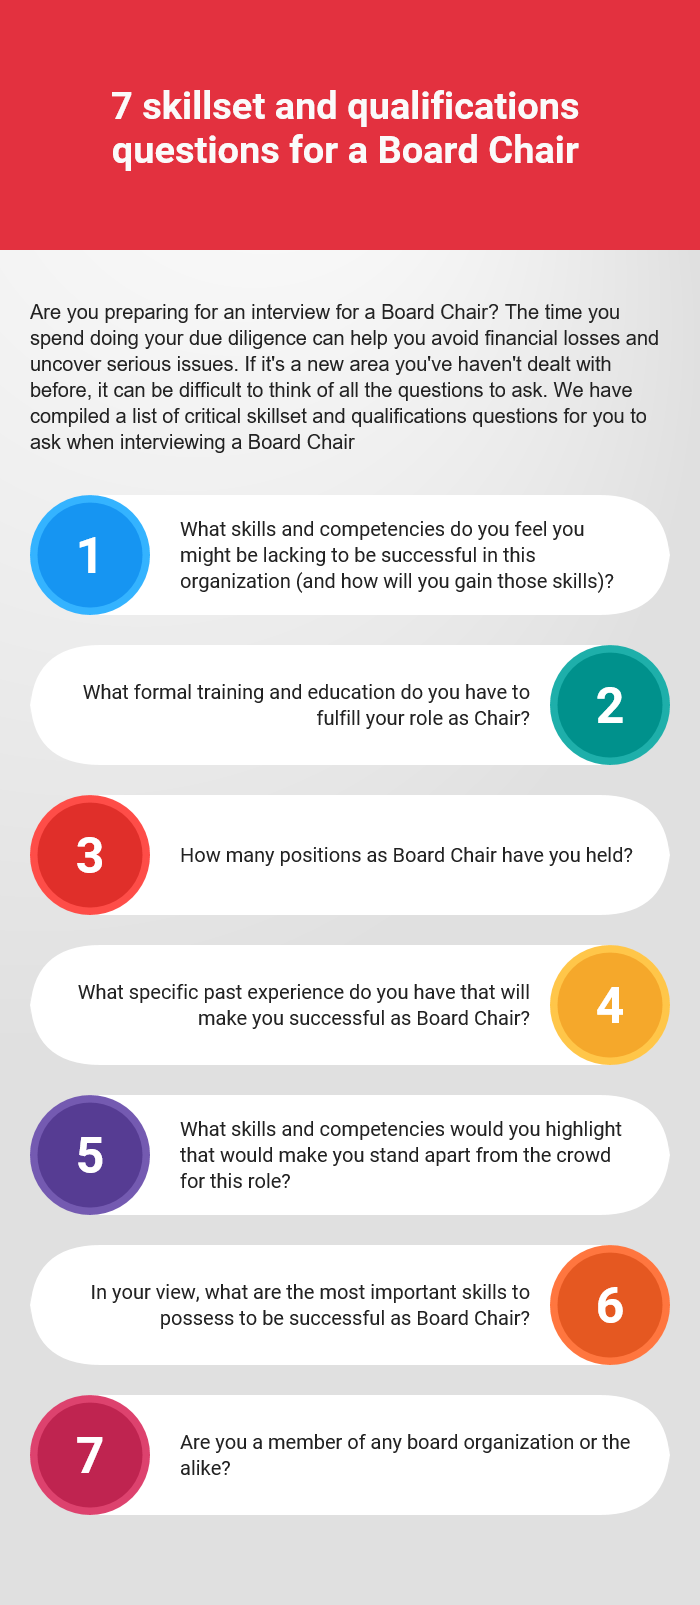 7 skillset and qualifications questions for a Board Chair